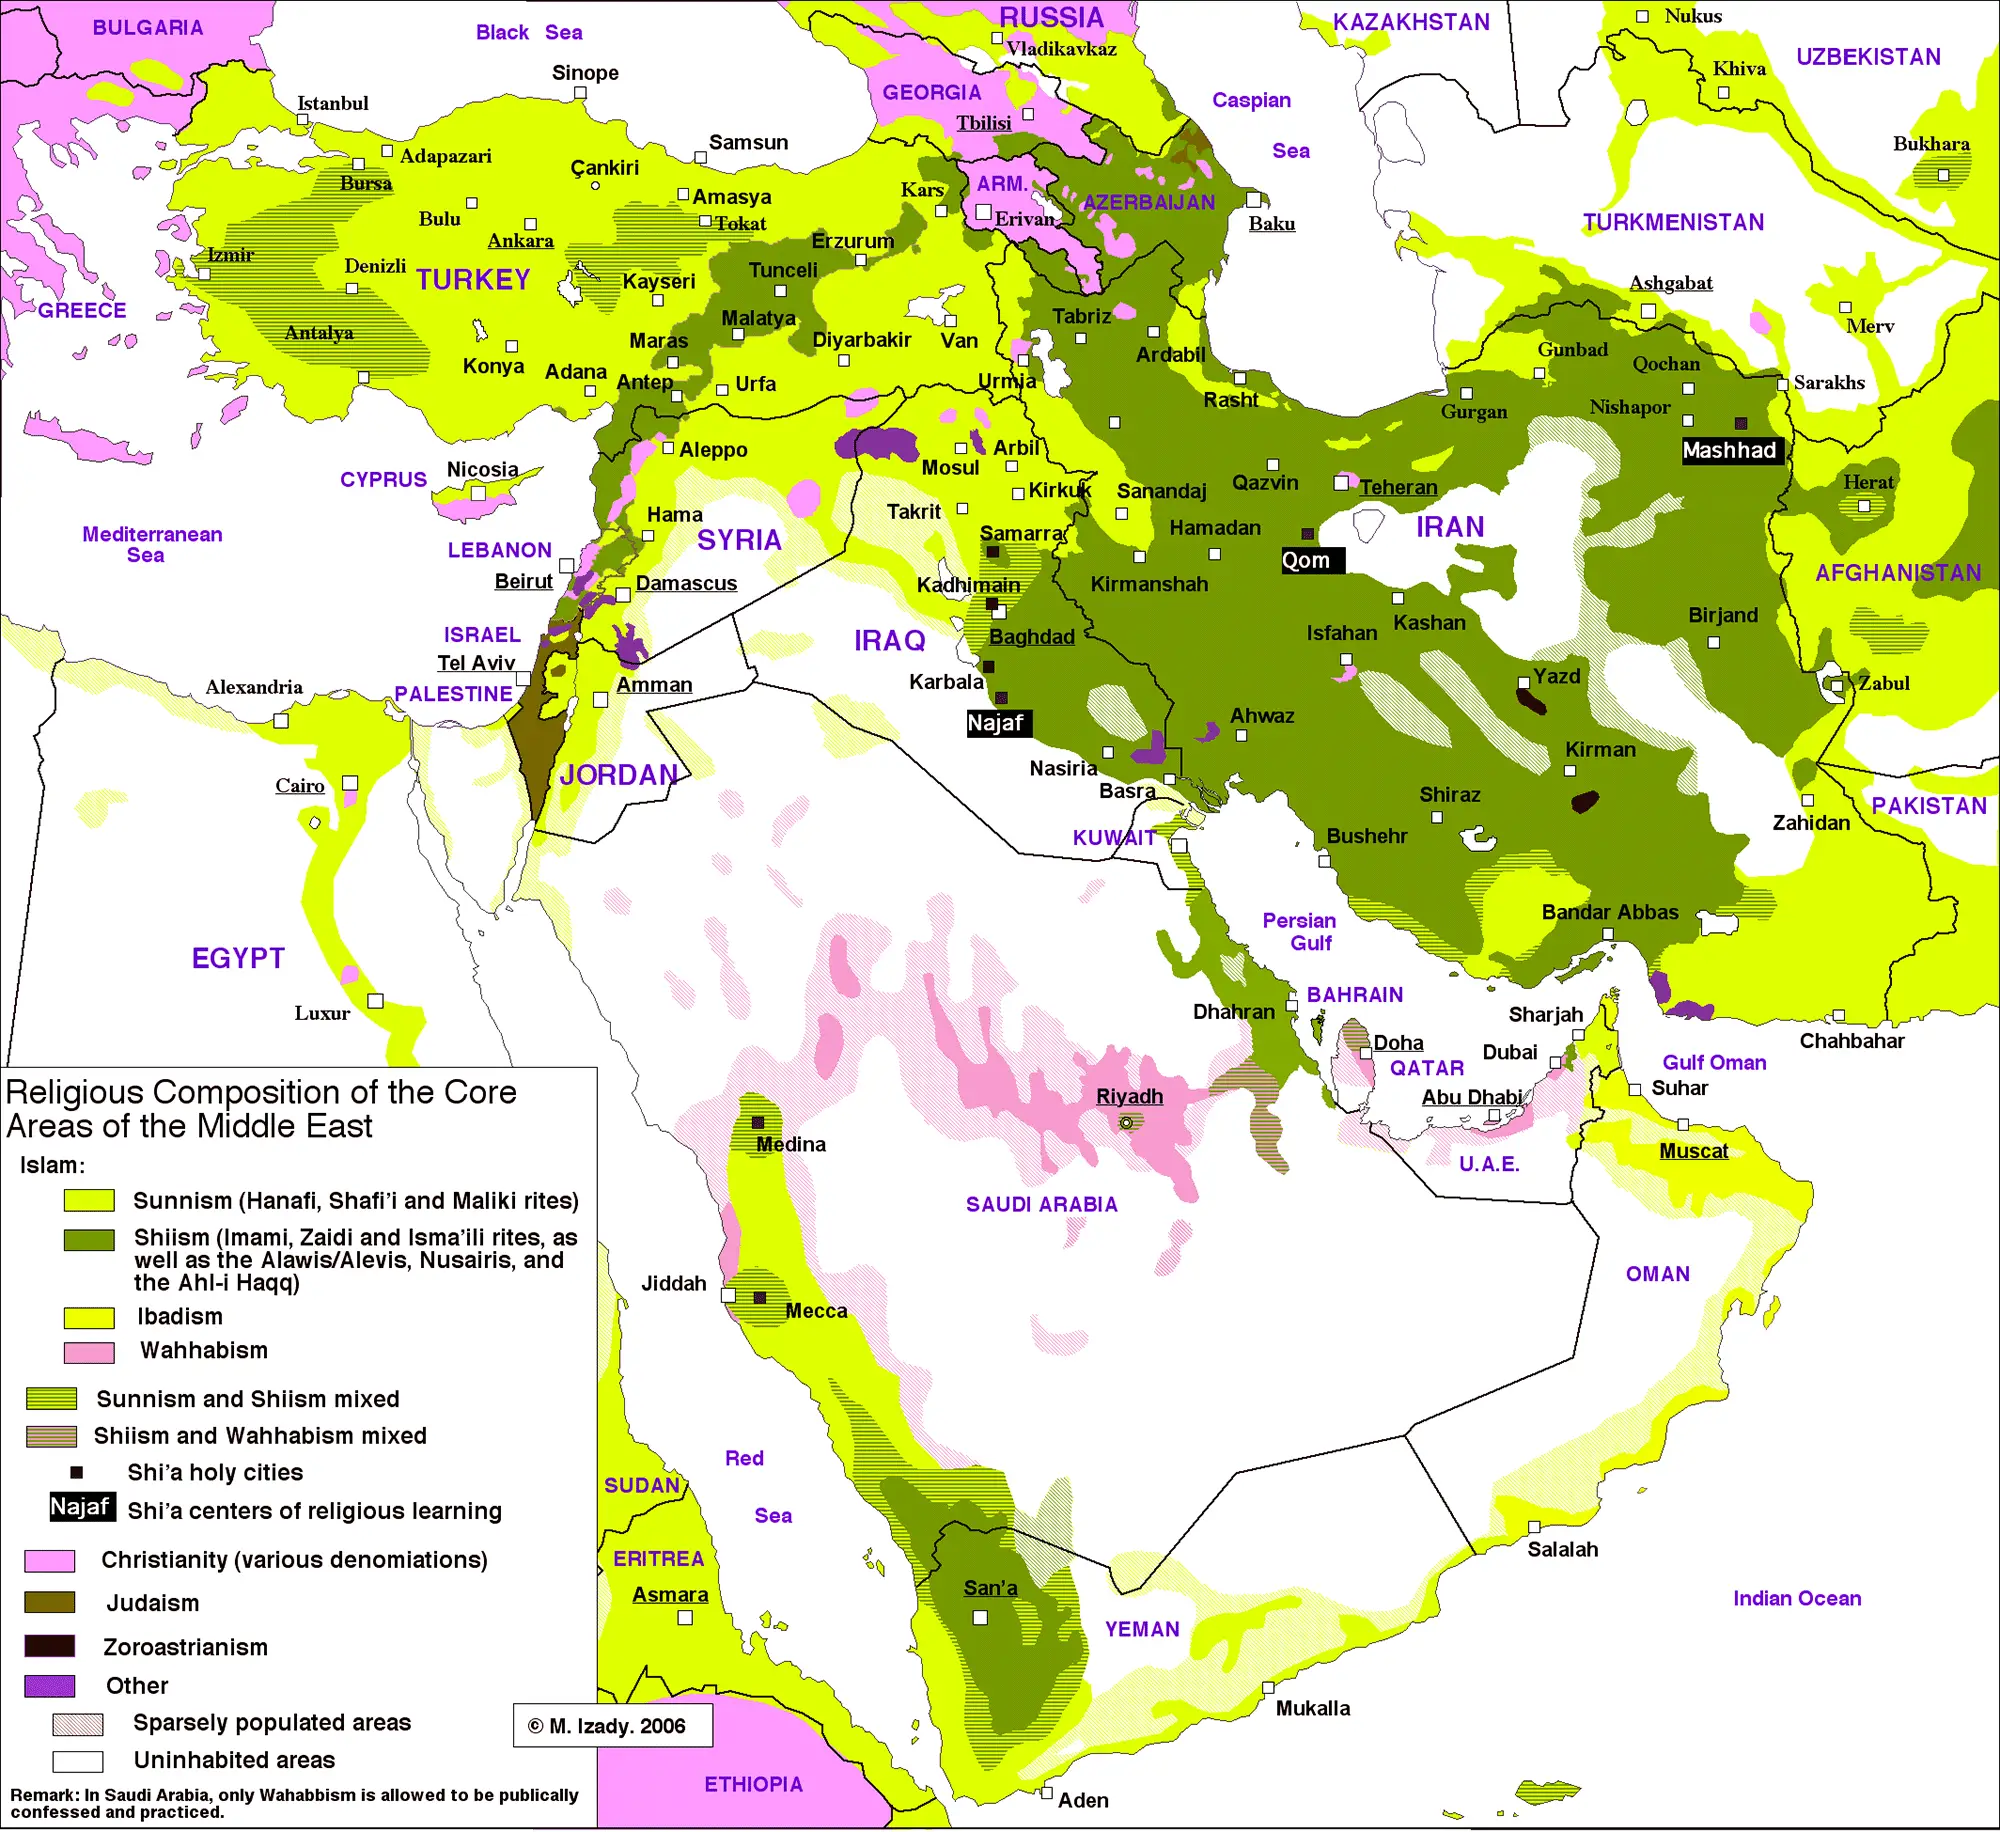 Map of Middle East religious composition